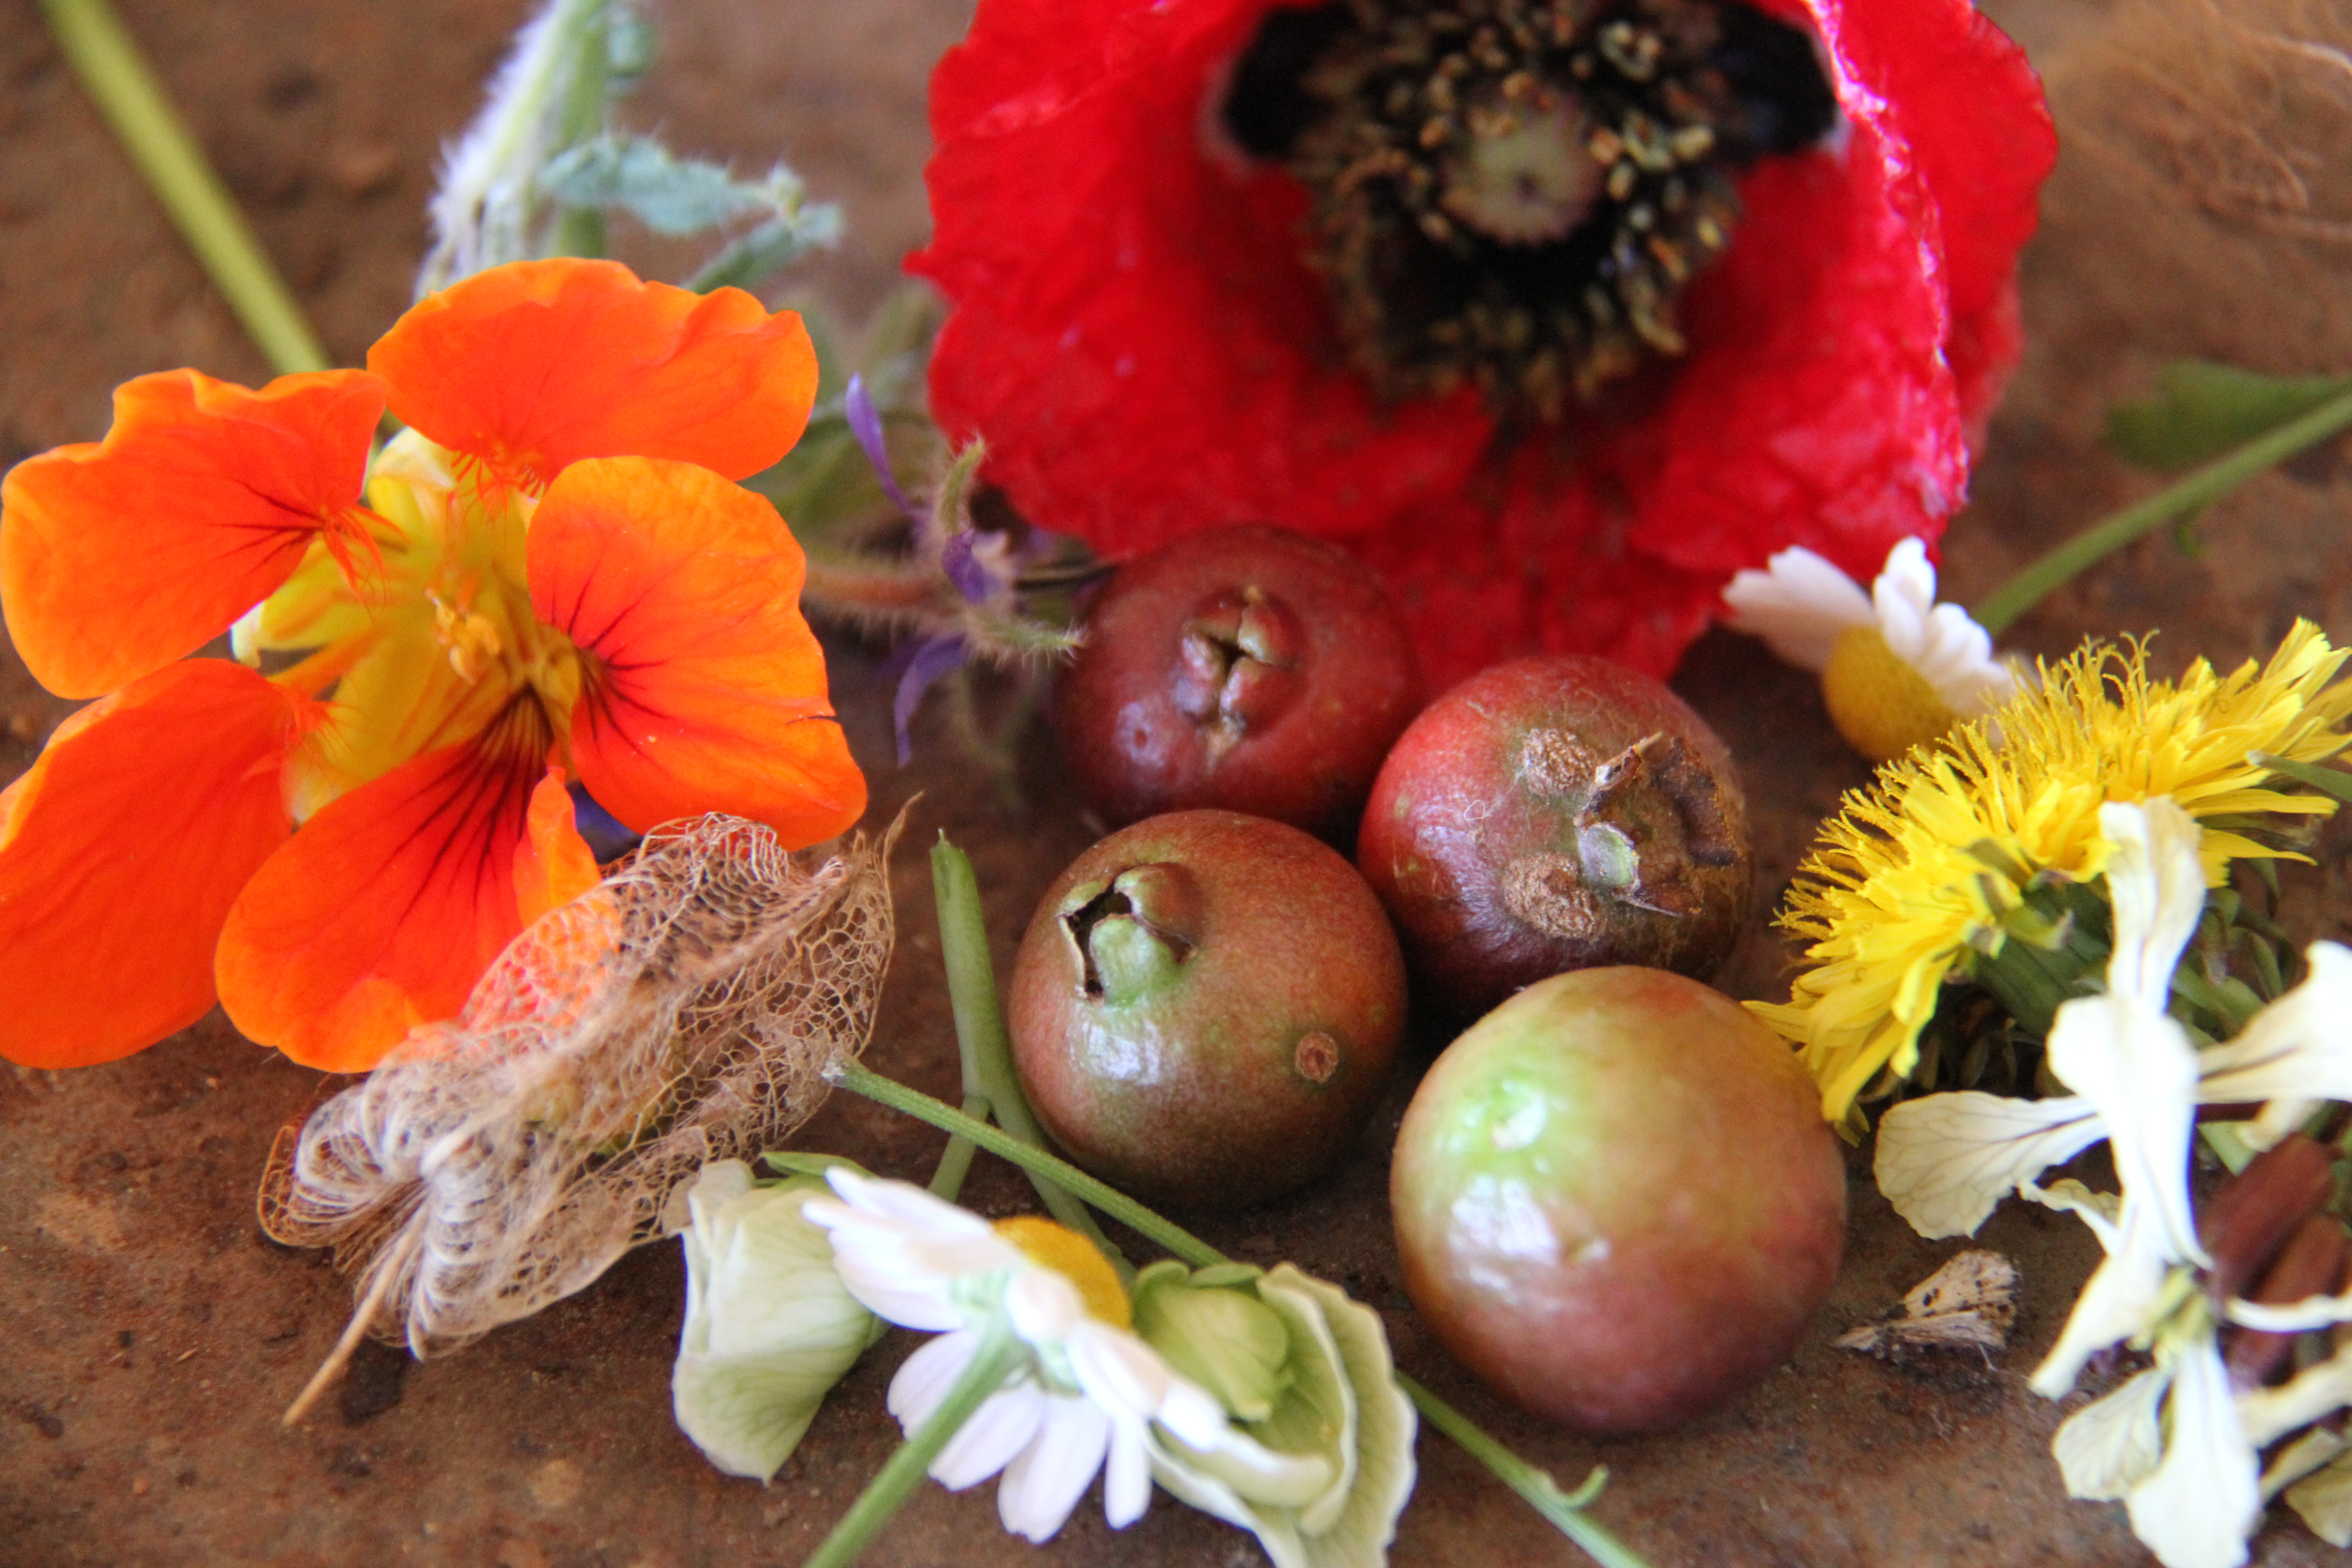 Photograph of cherry guavas and flowers